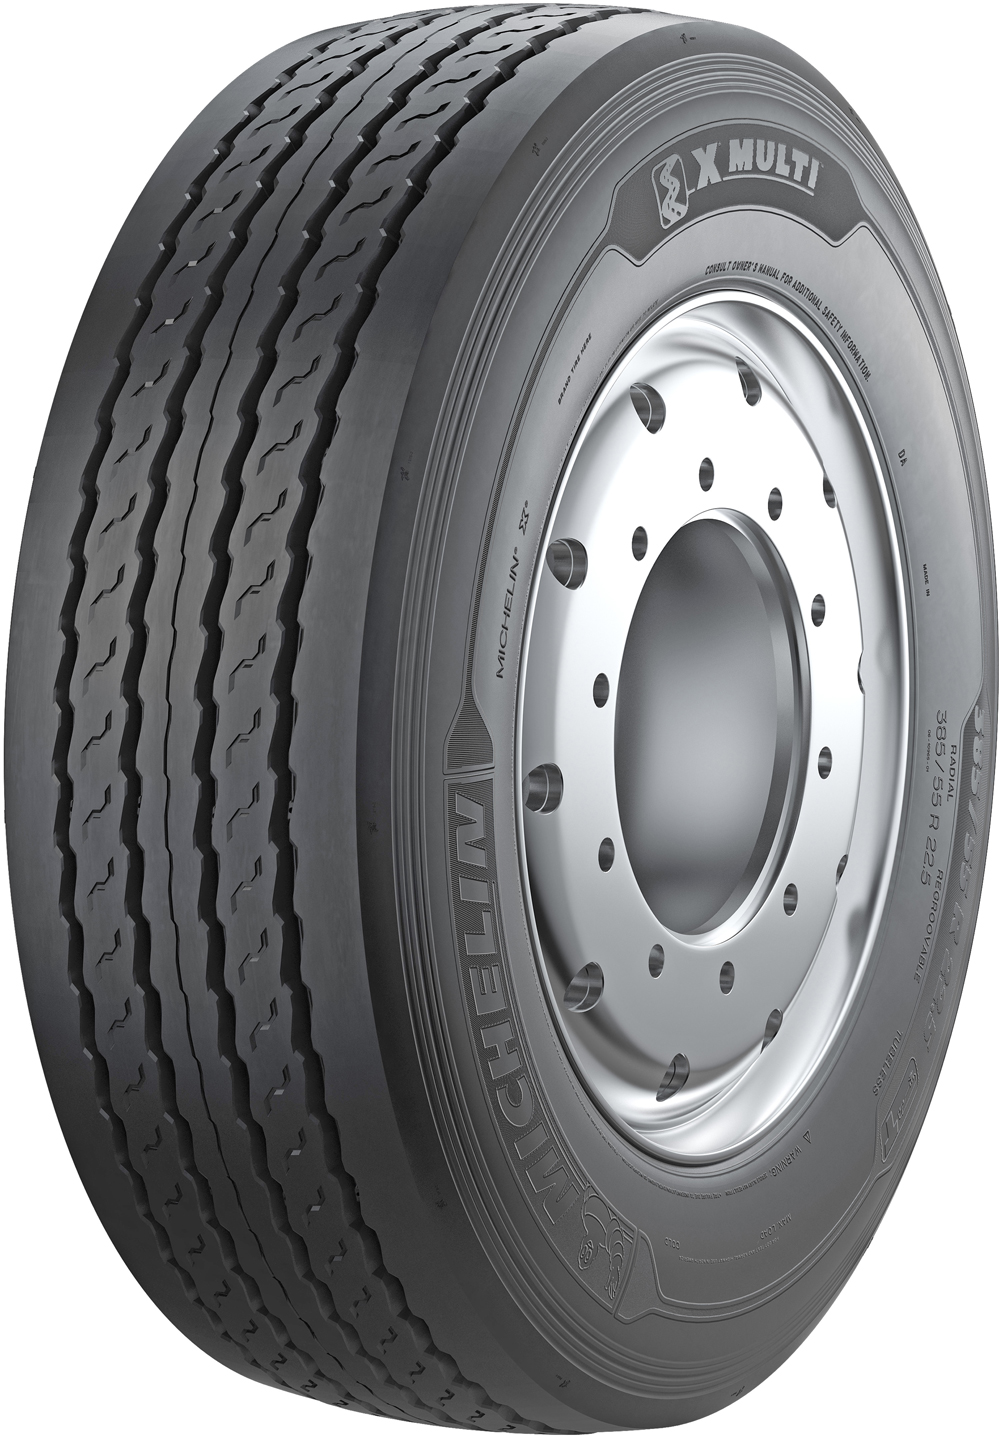 Anvelope camion MICHELIN XMULTITE 385/65 R22.5 160K